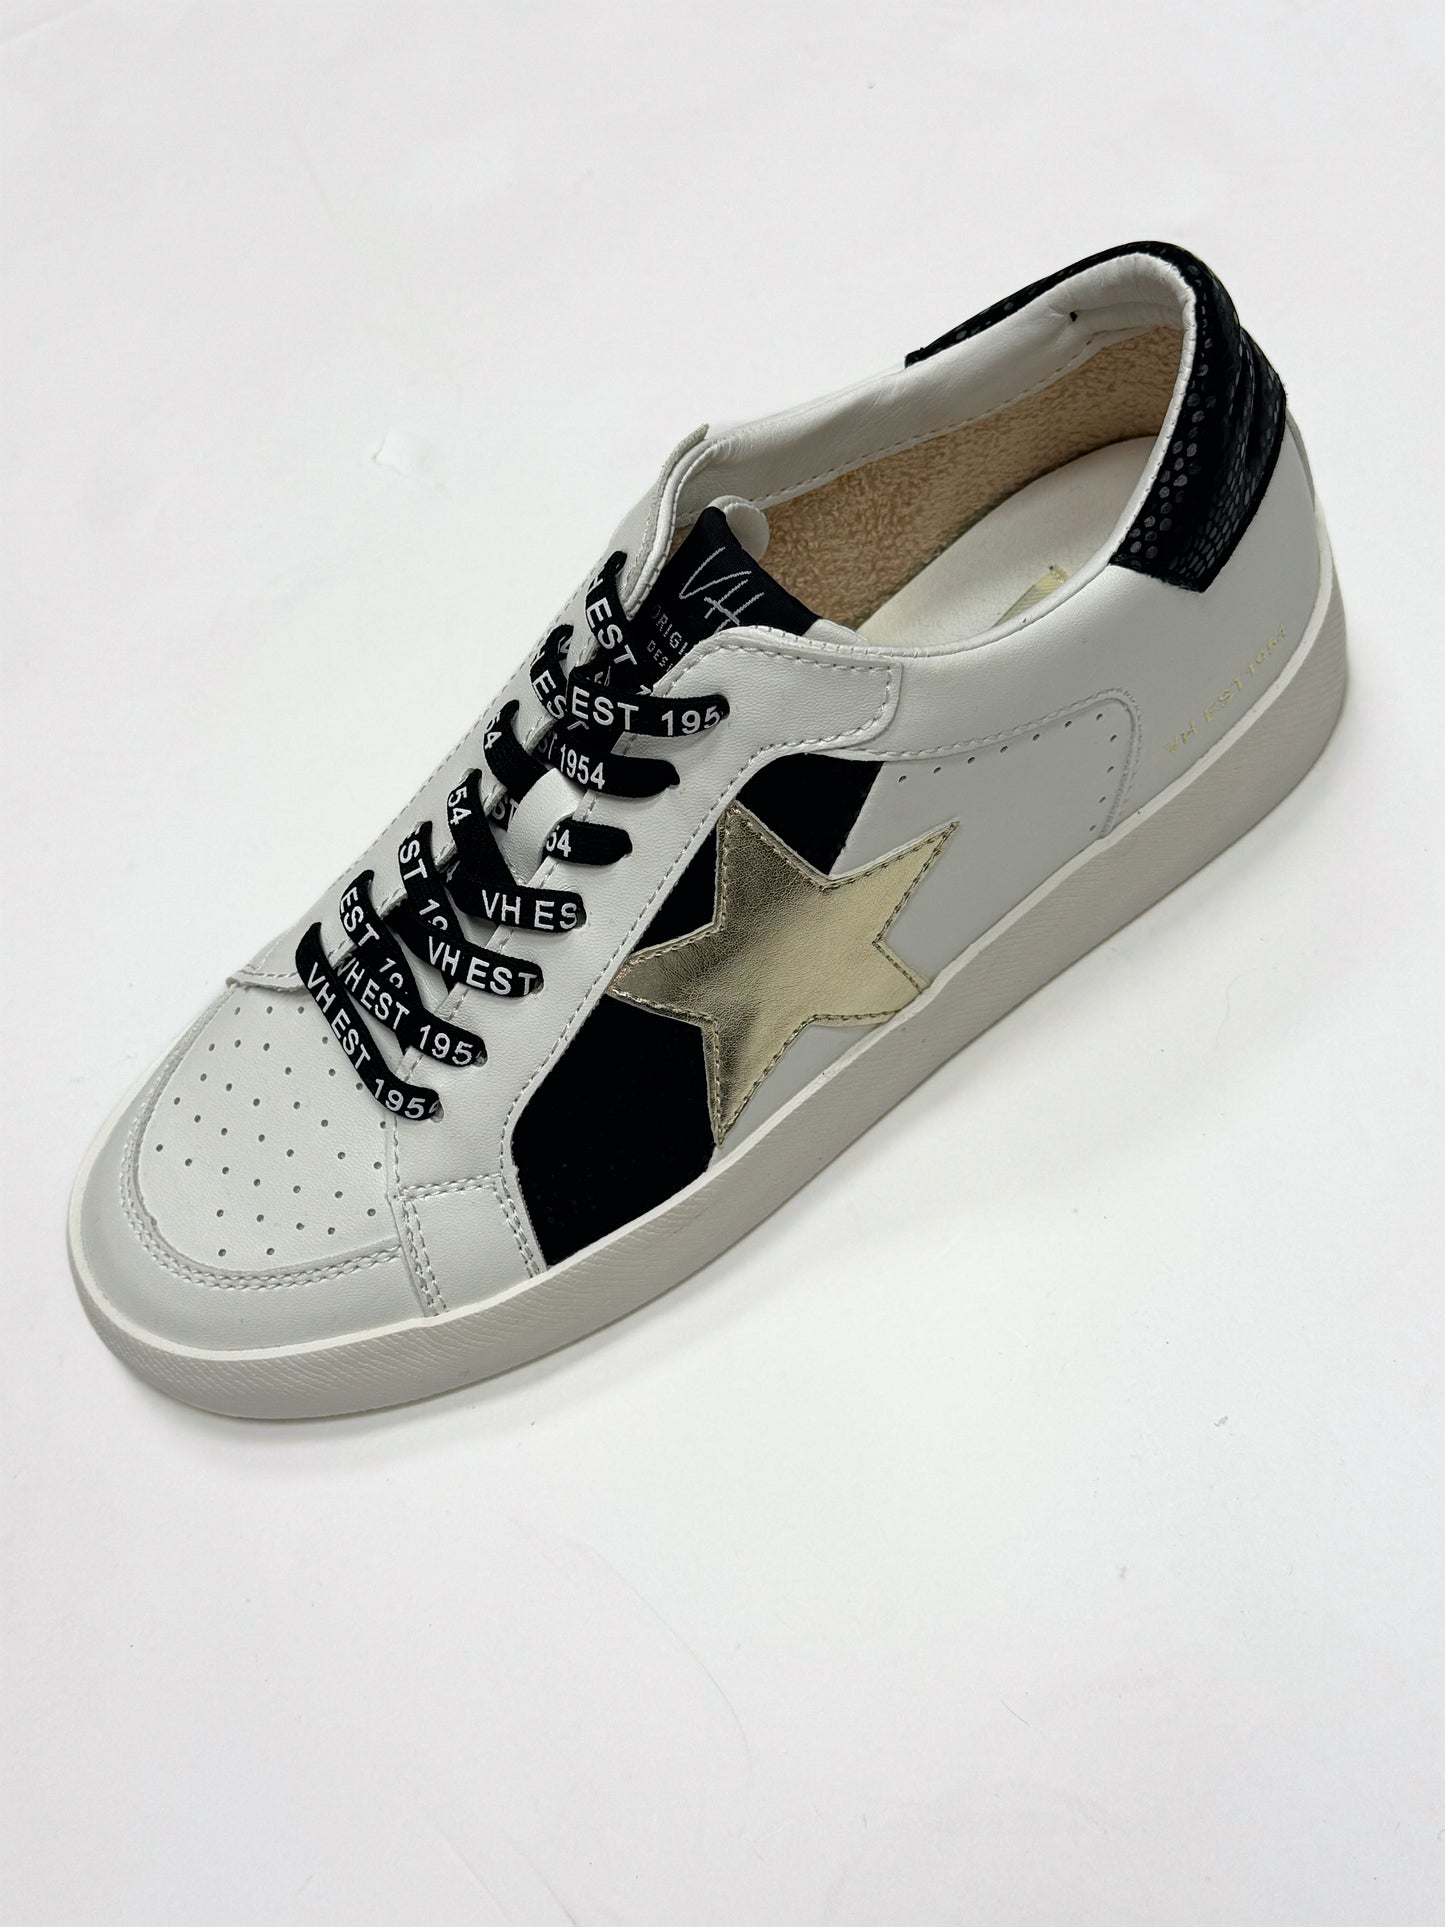 Vintage Havana Sneakers Black And White With gold Star